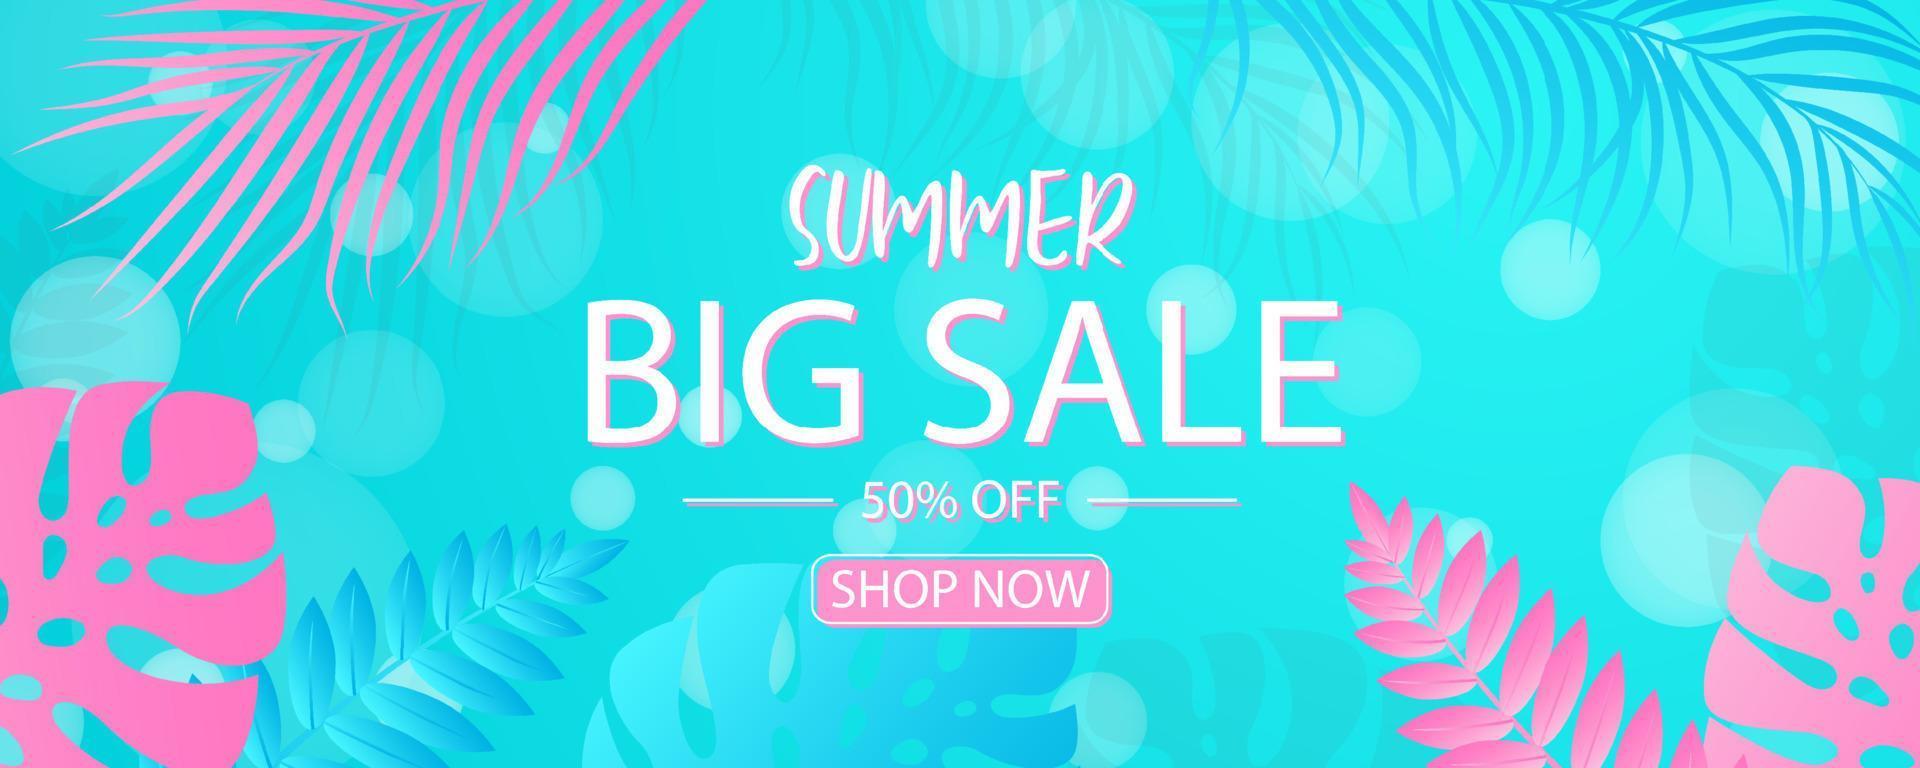 Summer banner template for advertising summer arrivals collection or seasonal sales promotion vector